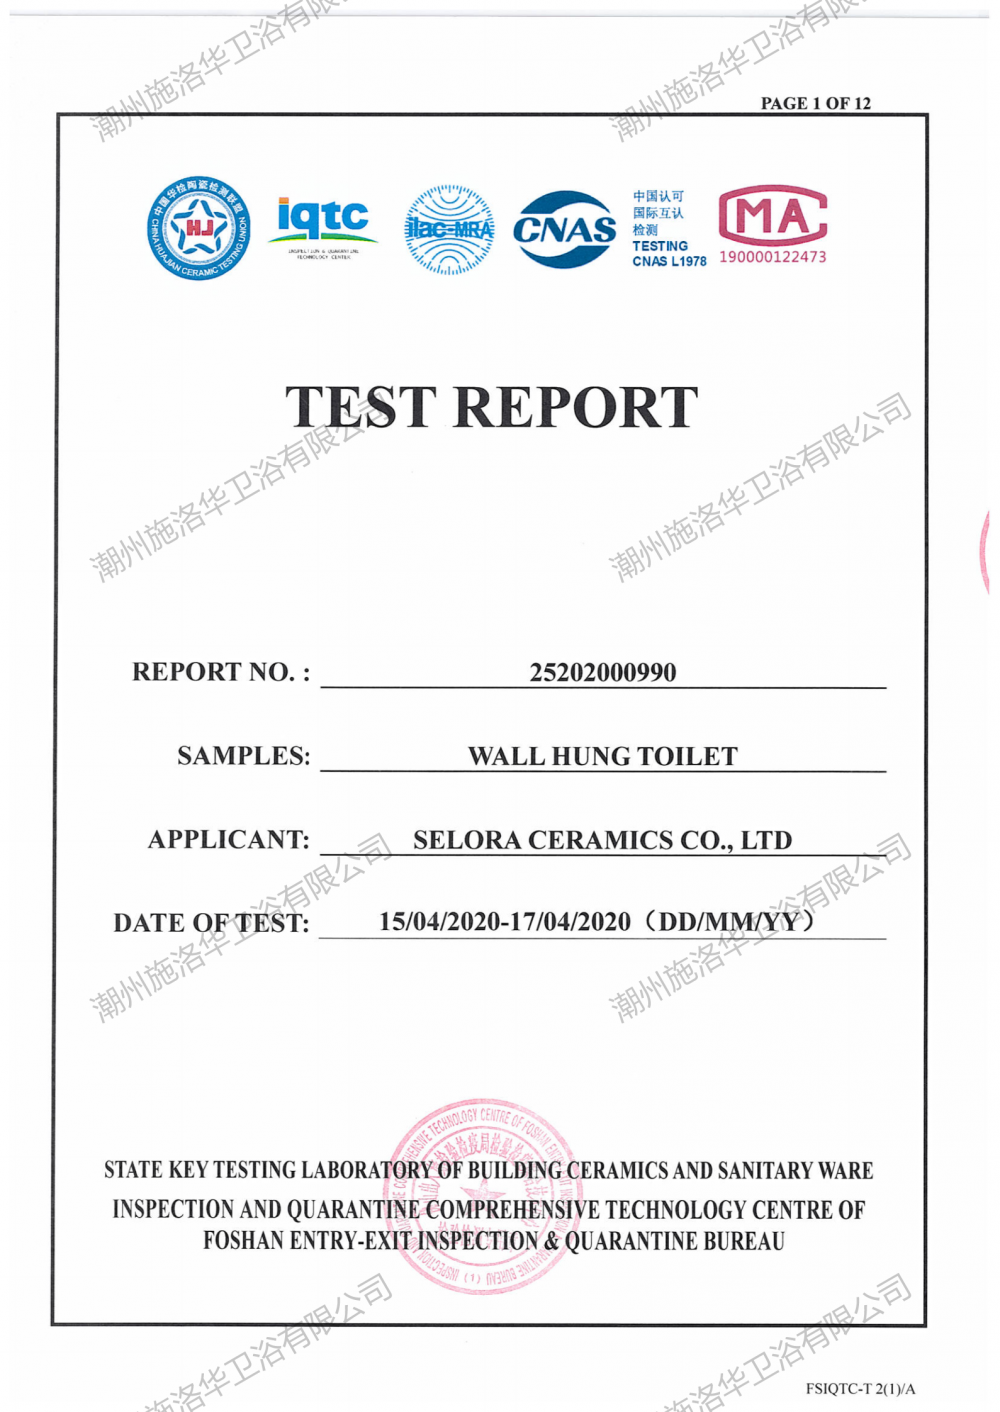 wall hung toilet certification